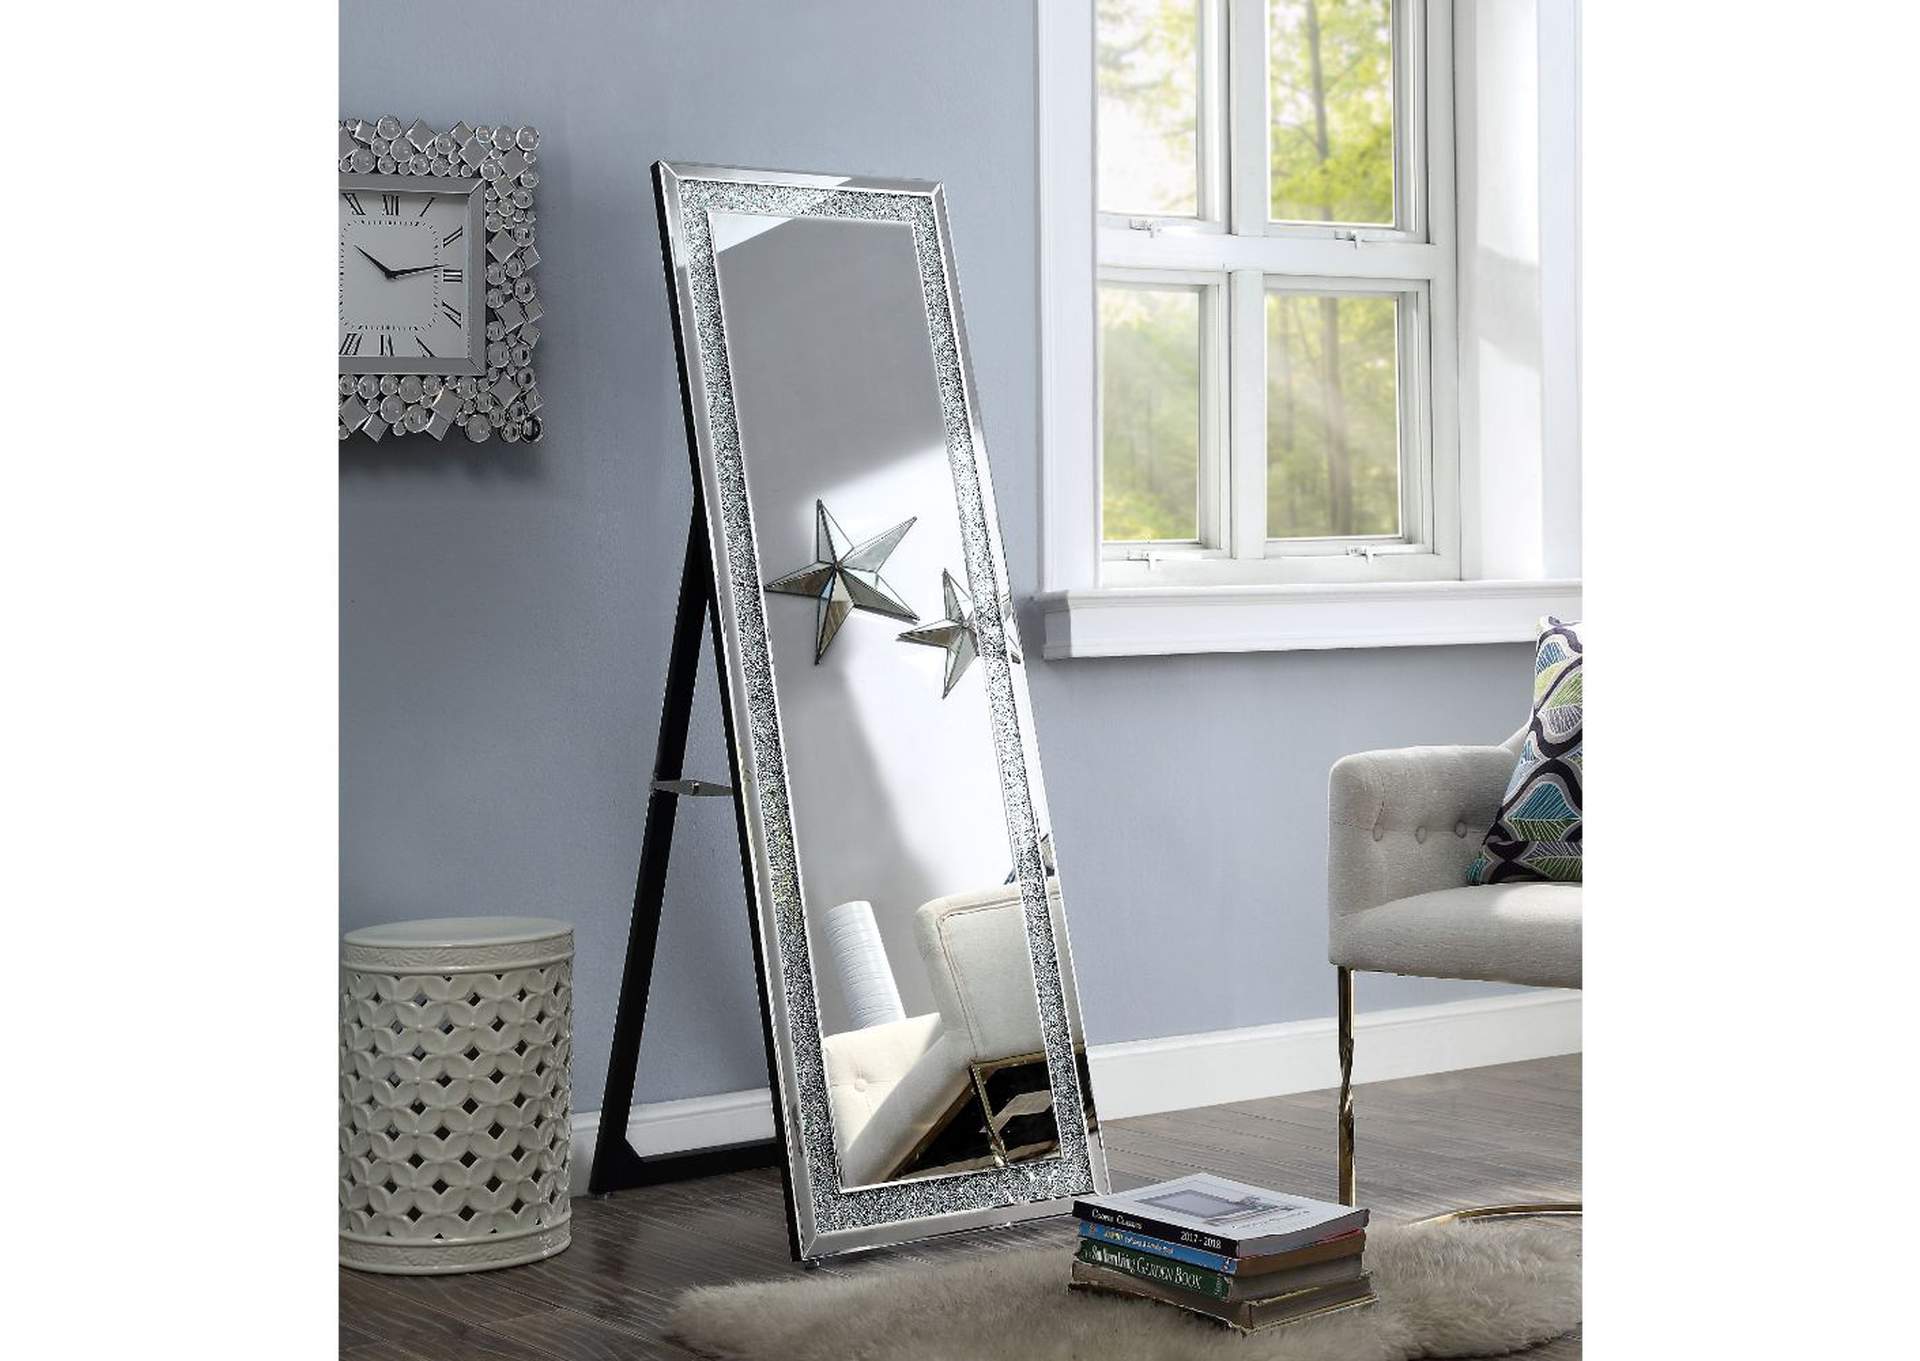 Nowles Mirrored & Faux Stones Accent Mirror,Acme